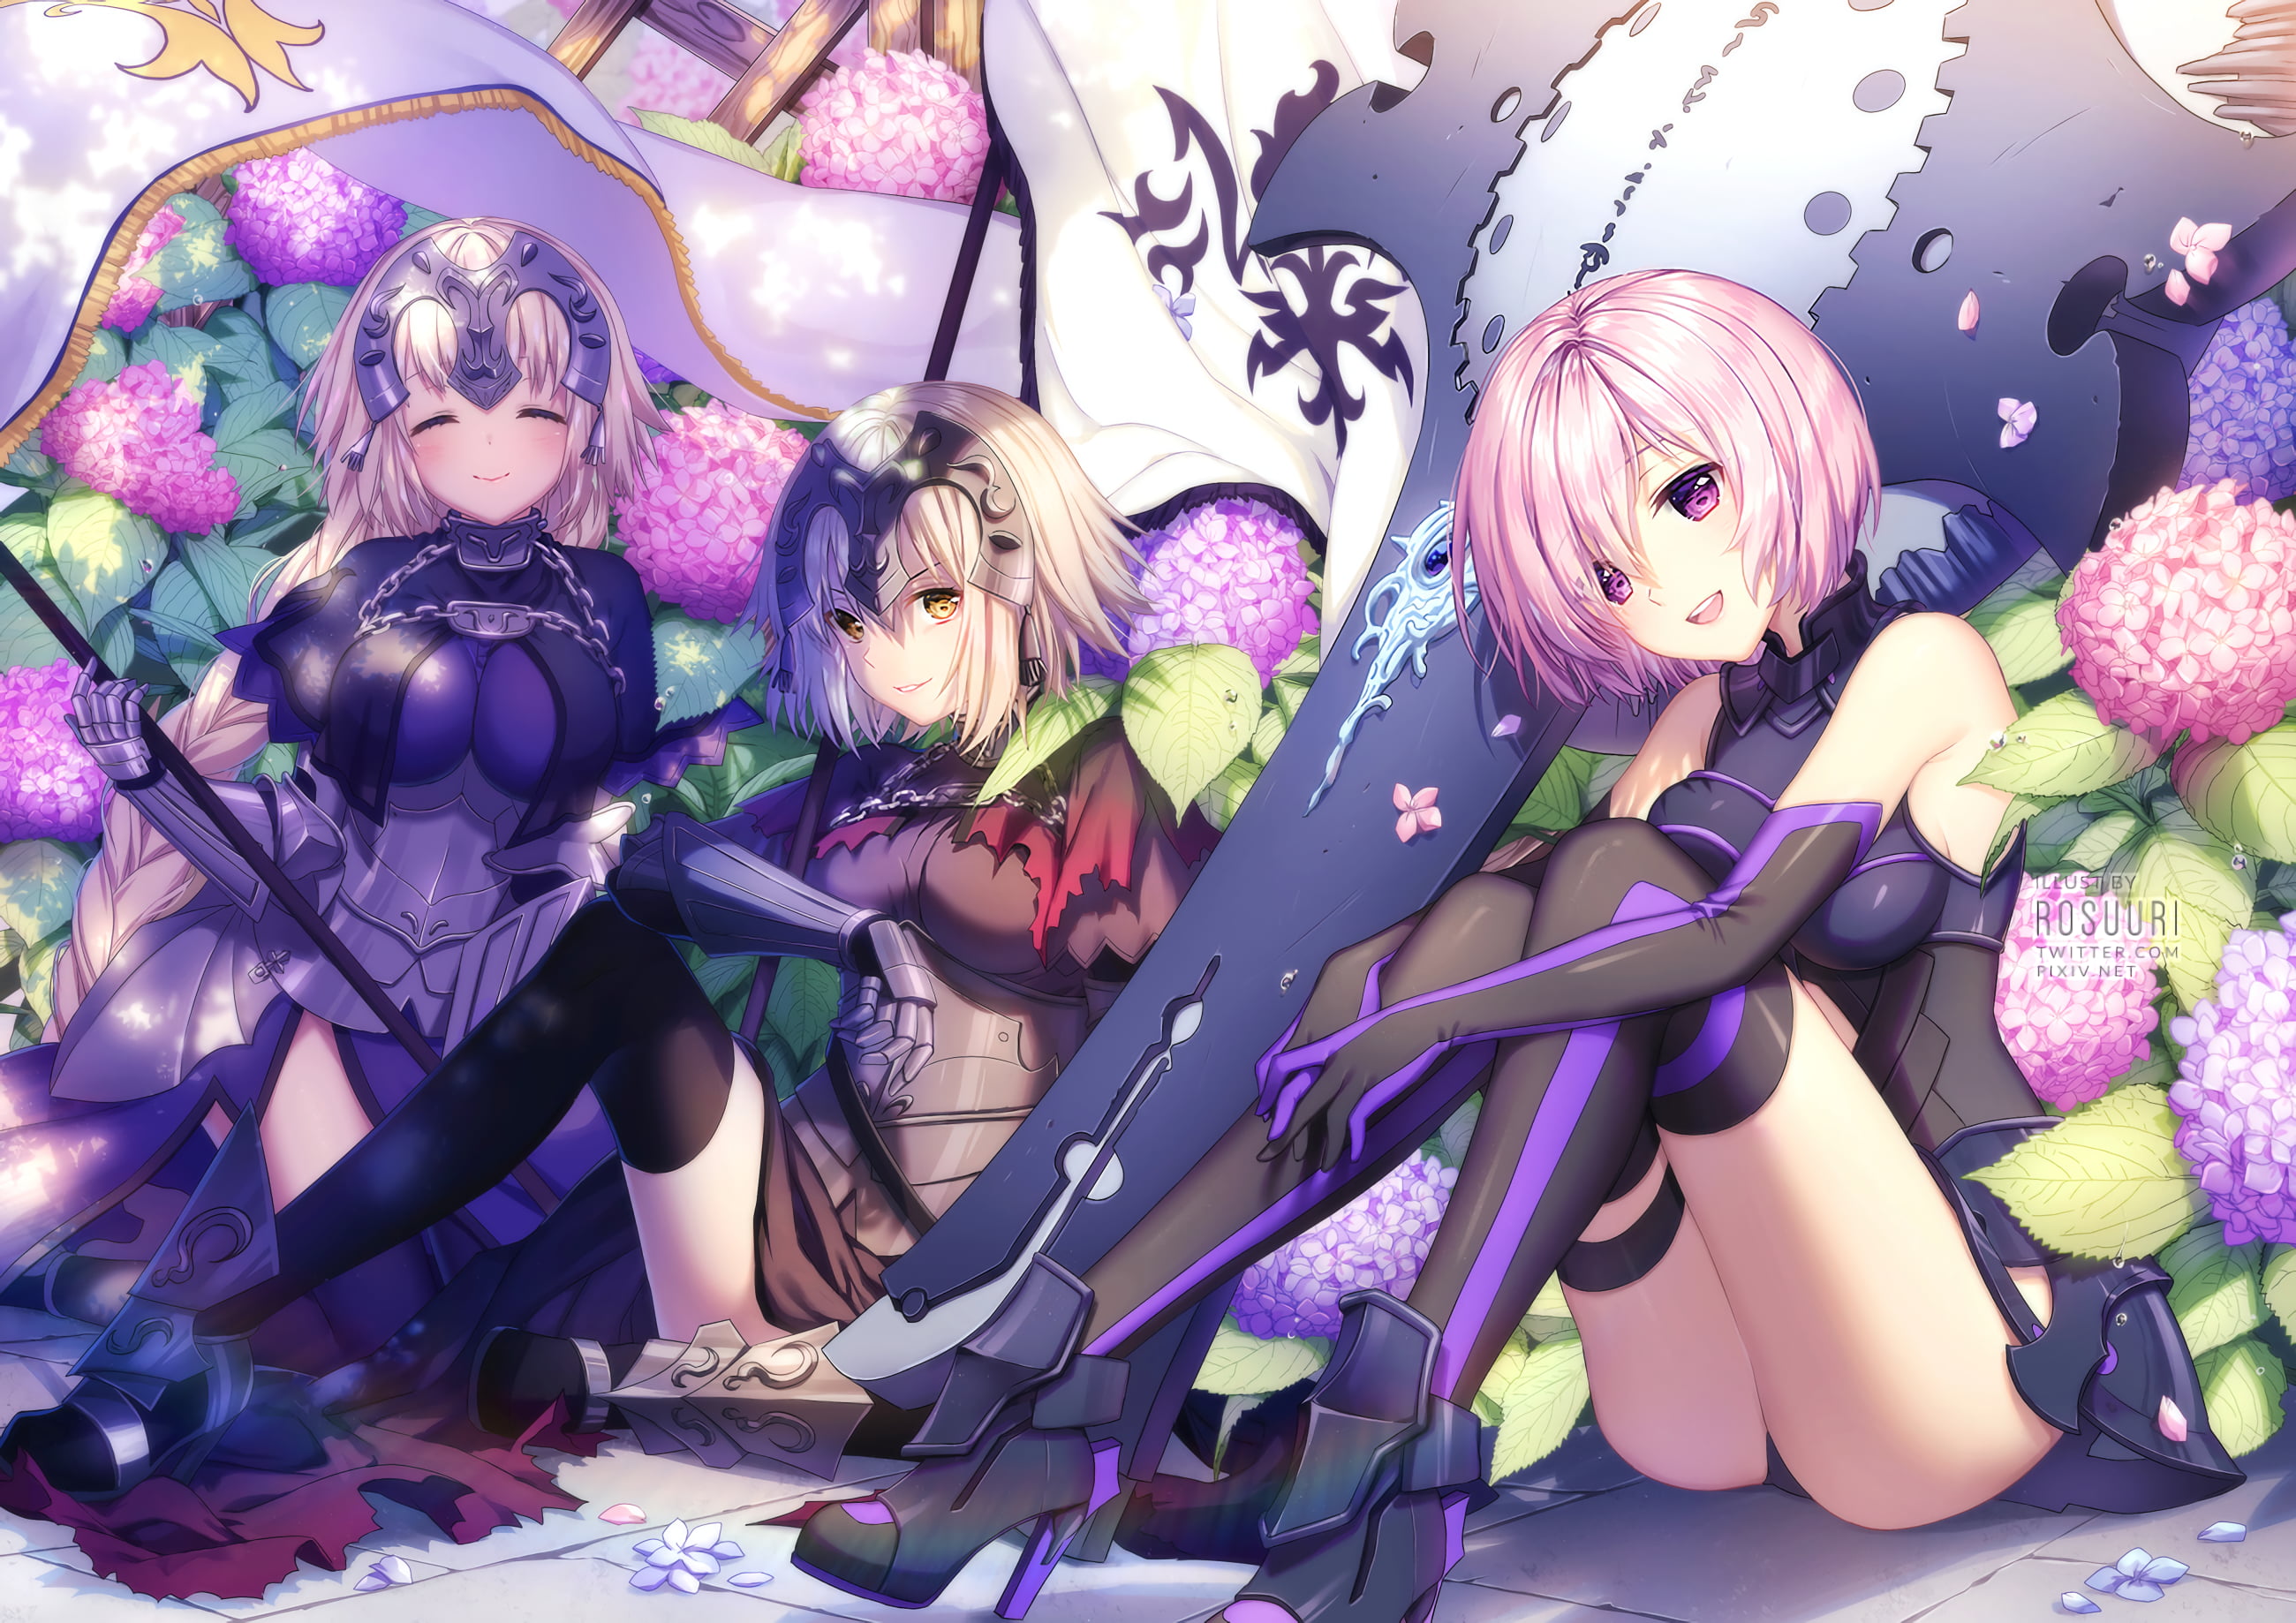 Three Female Anime Characters Digital Wallpaper Ruler Fate Apocrypha Jeanne Alter Fate Grand Order Shielder Fate Grand Order Thigh Highs Hd Wallpaper Wallpaper Flare